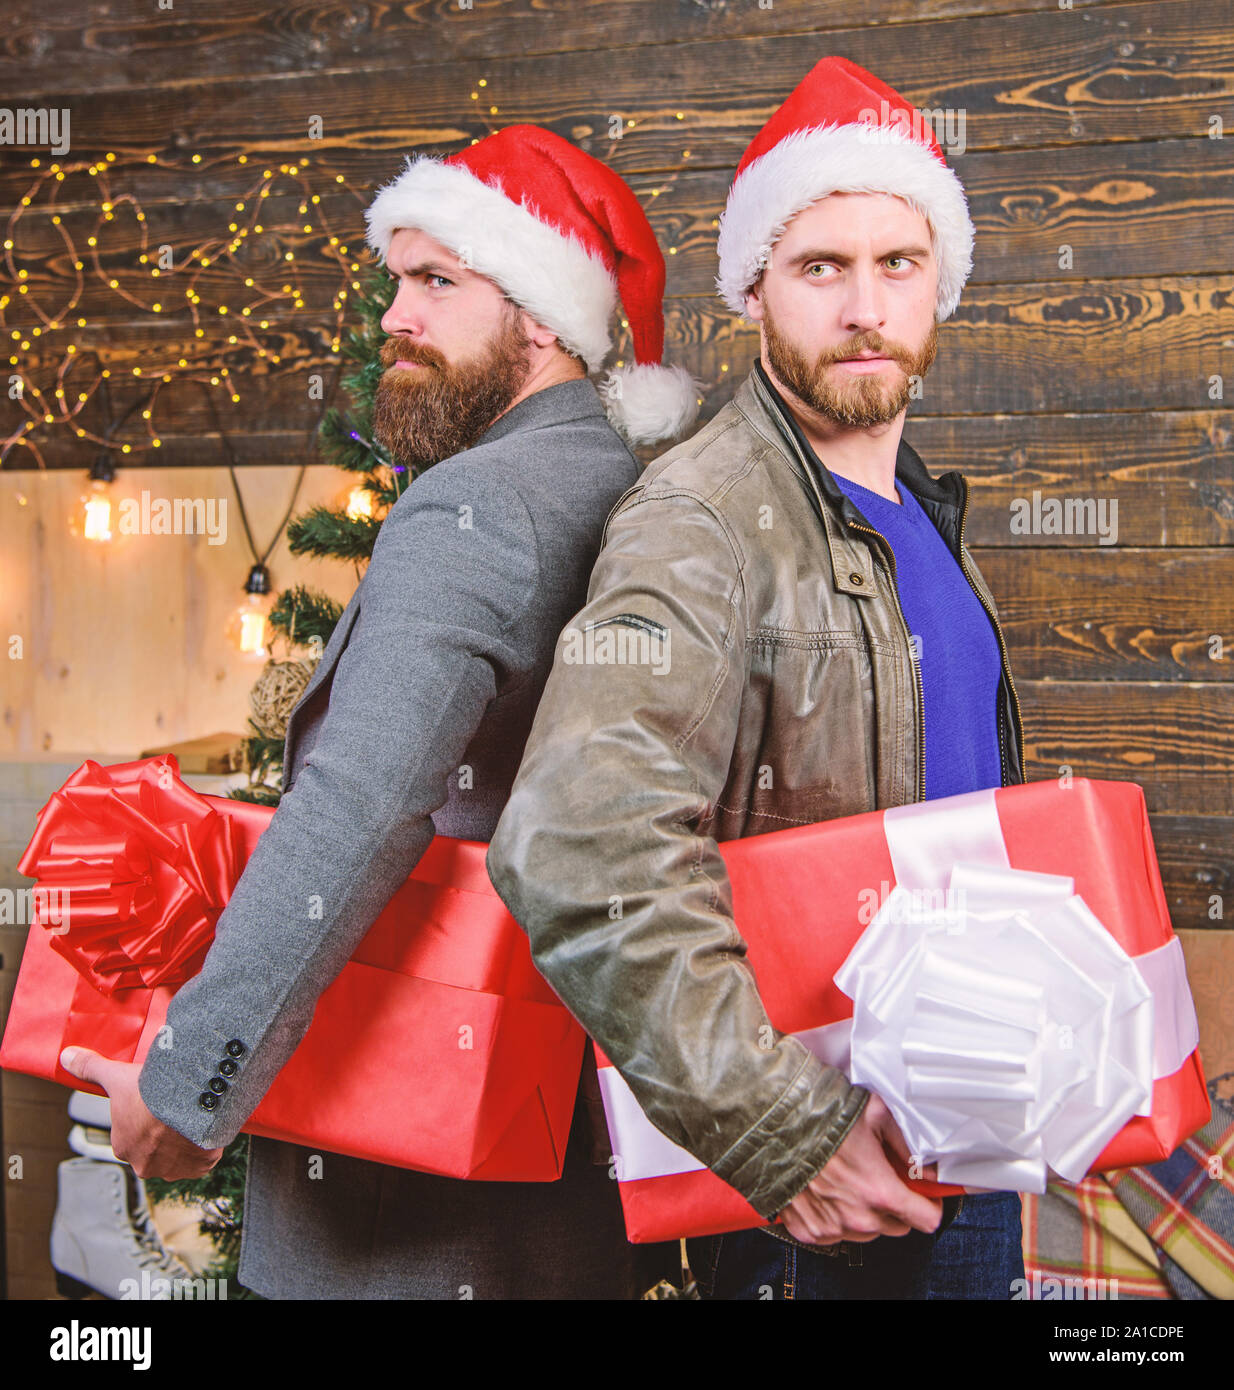 Men Wear Santa Hat Hold Gift Boxes Bearded Men Carry Present Boxes Delivery Christmas Present Christmas Is Coming Brutal Hipster Guys Celebrate Christmas With Gifts Get Ready For Christmas Stock Photo